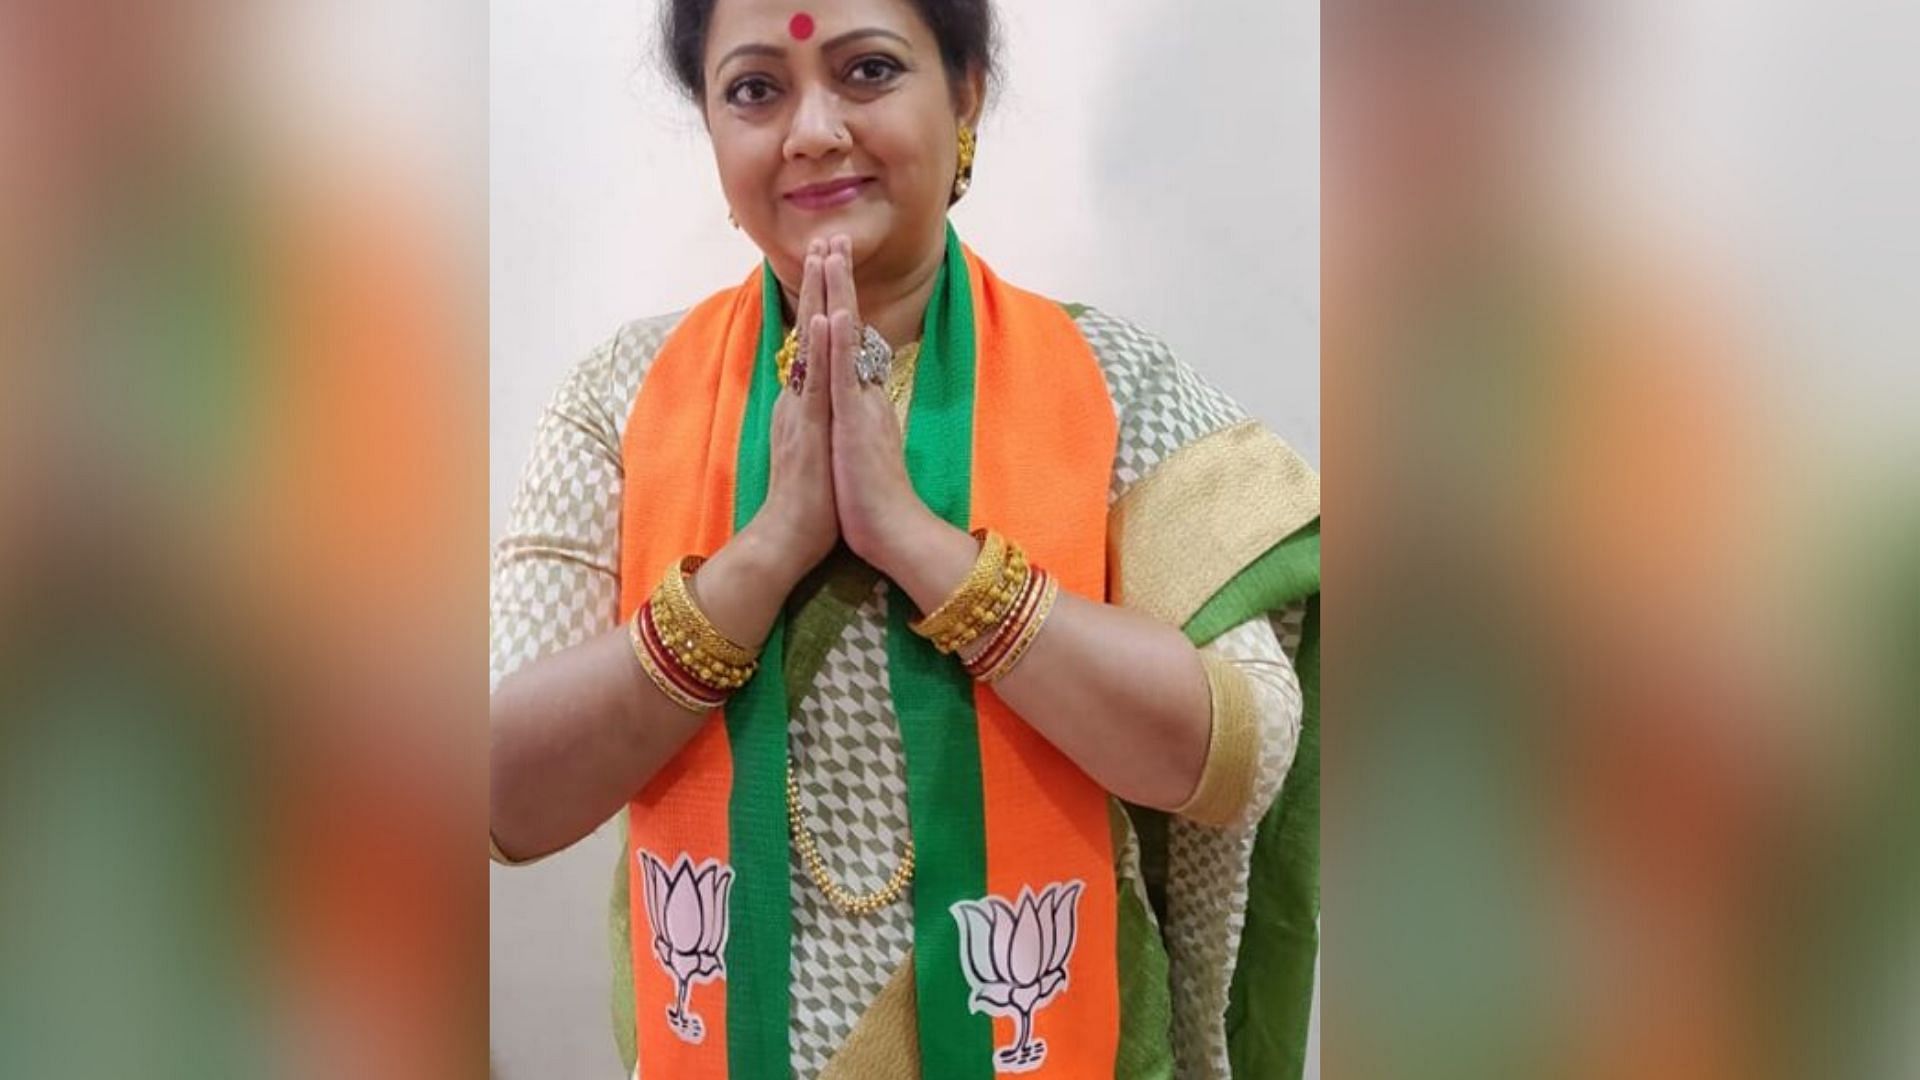 A popular Bengali actor, Subhadra Mukherjee, who joined the BJP in 2013, has resigned from the primary membership of the party expressing dismay over the "recent hate-filled situation" in the country.